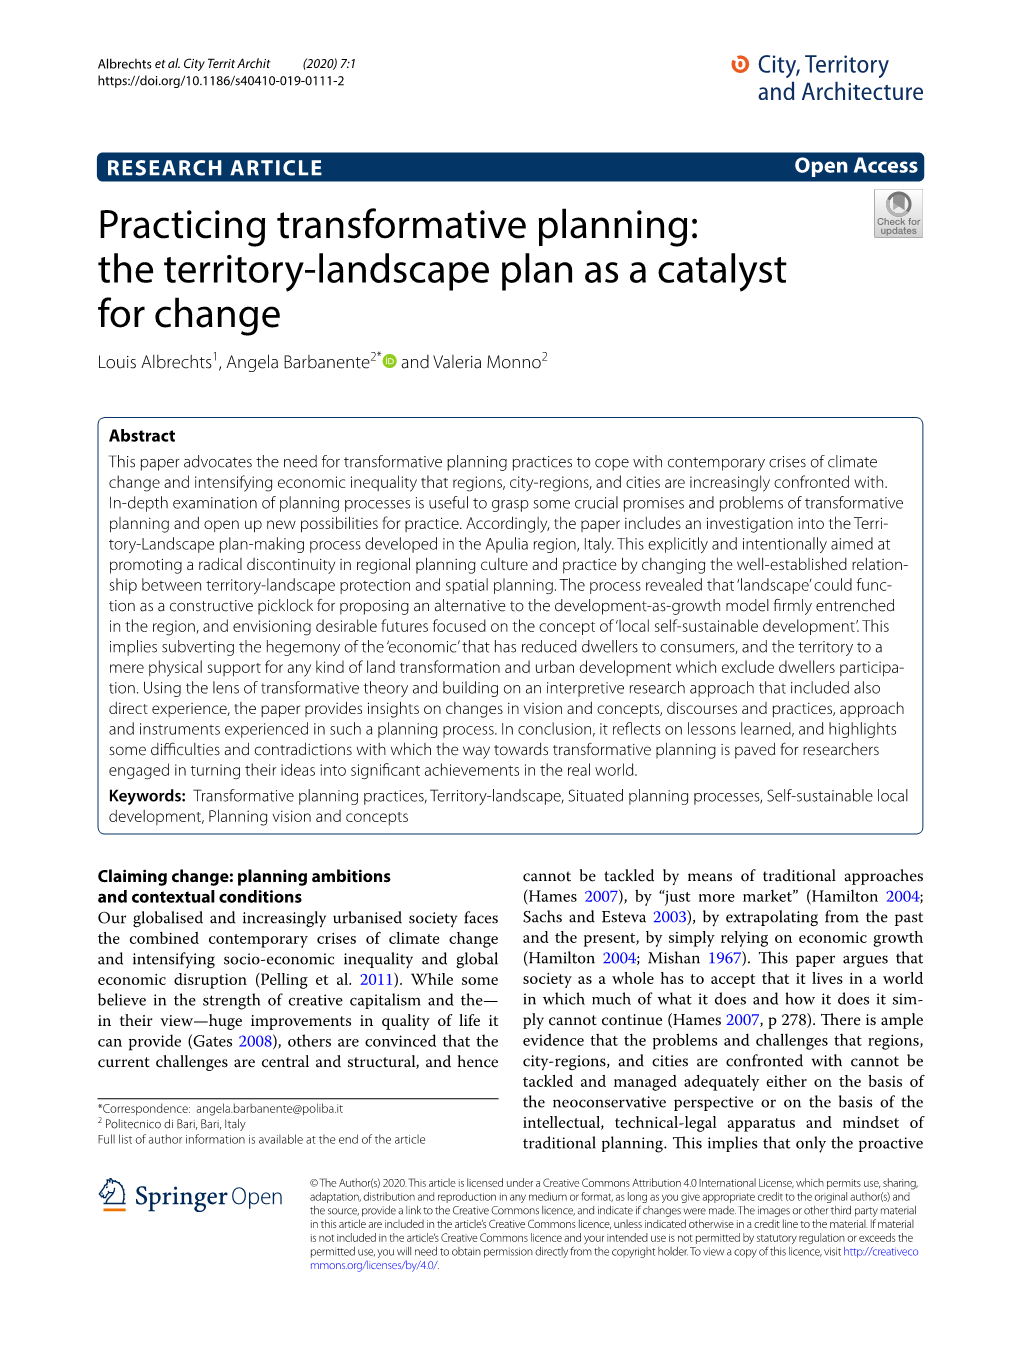 Practicing Transformative Planning: the Territory-Landscape Plan As A